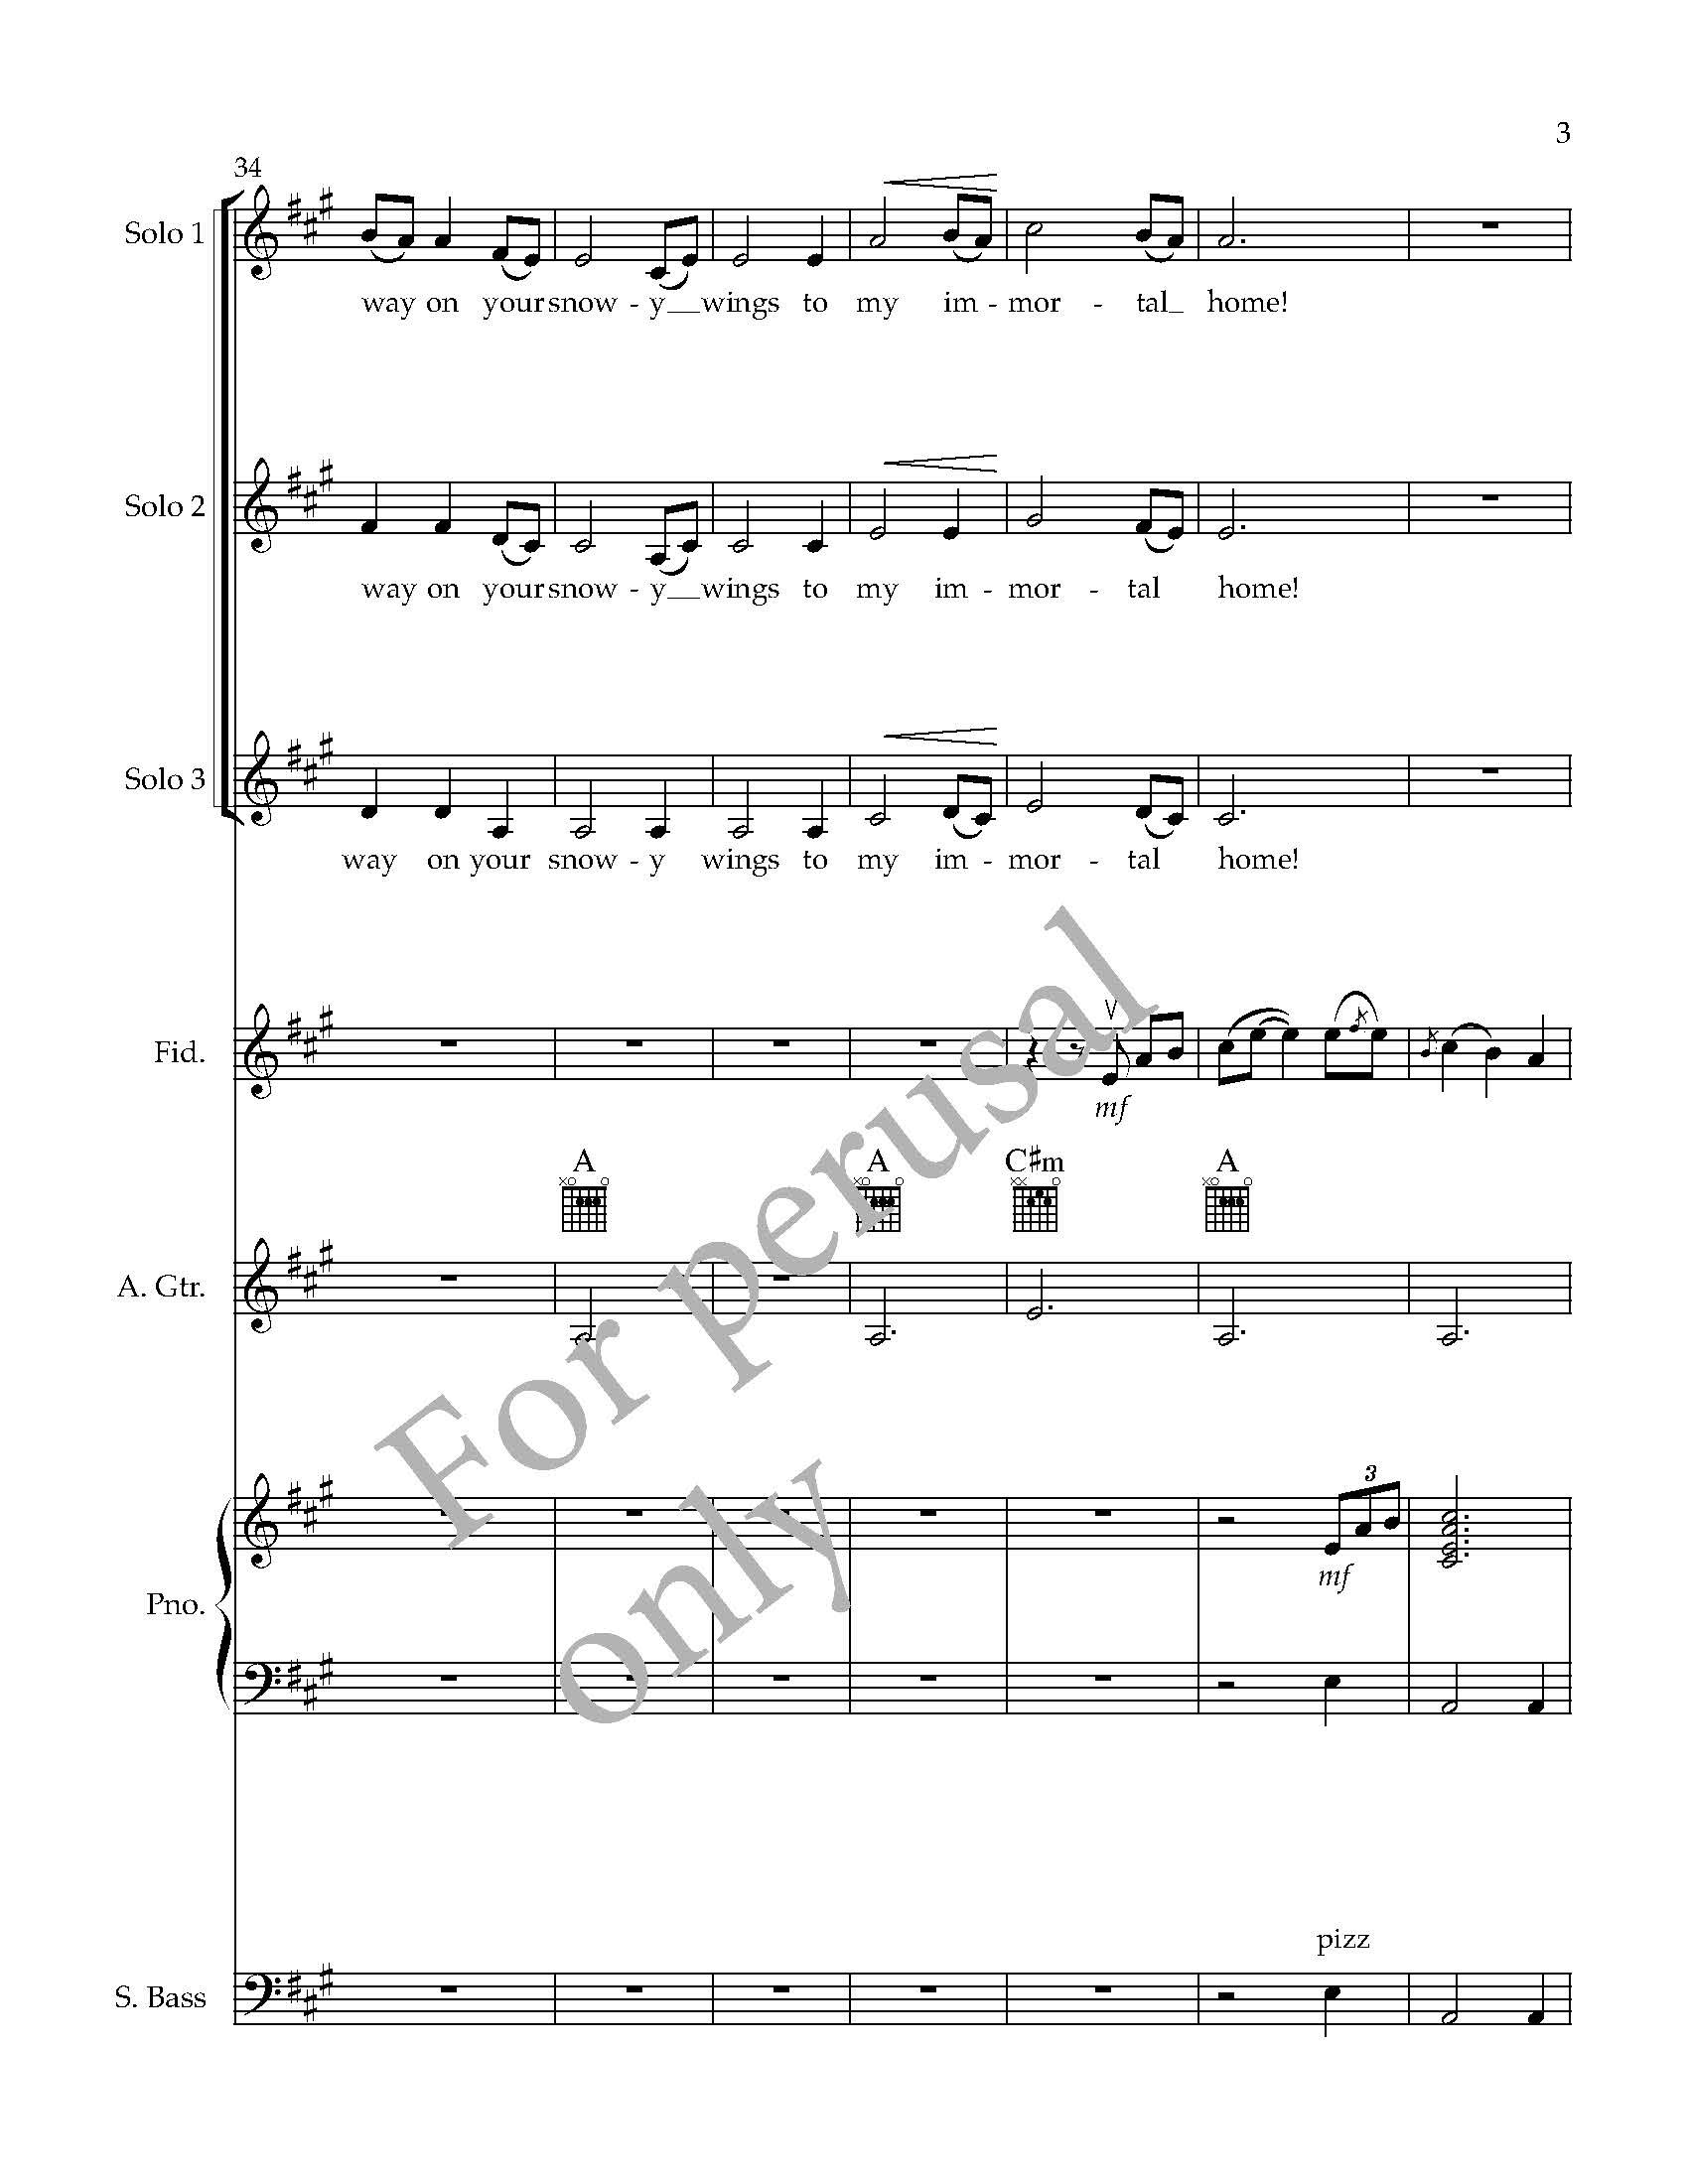 FULL SCORE preview - Angel Band for choir, fiddle, piano, guitar, and bass - arr_Page_03.jpg